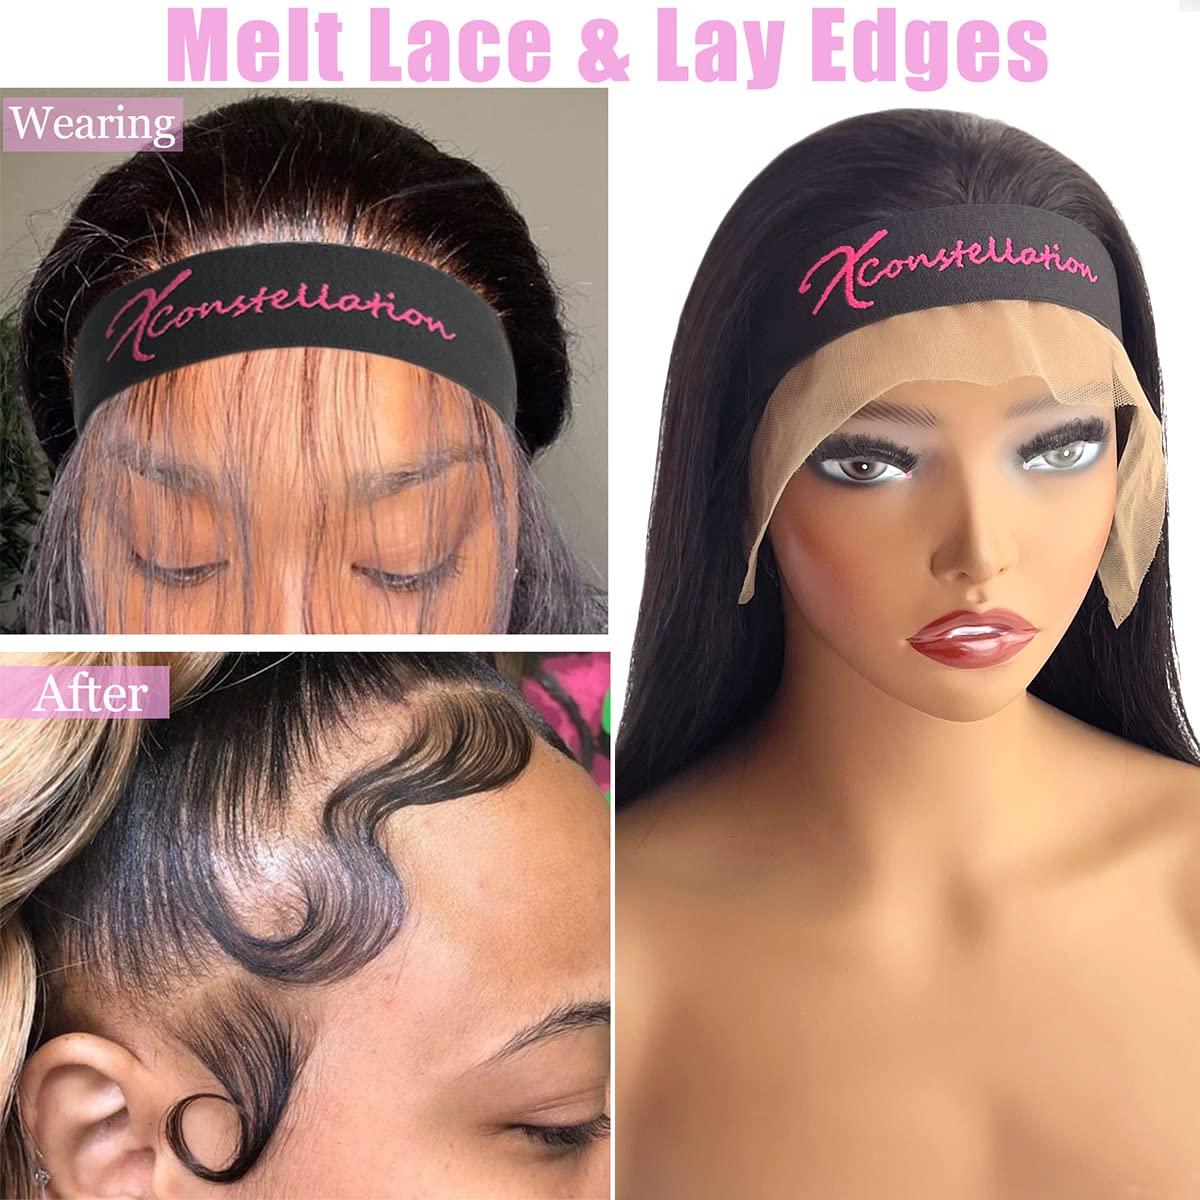 Wig Bands For Keeping Wigs In Place Lay The Lace Wig Headband Lace Band Wig  Accessories